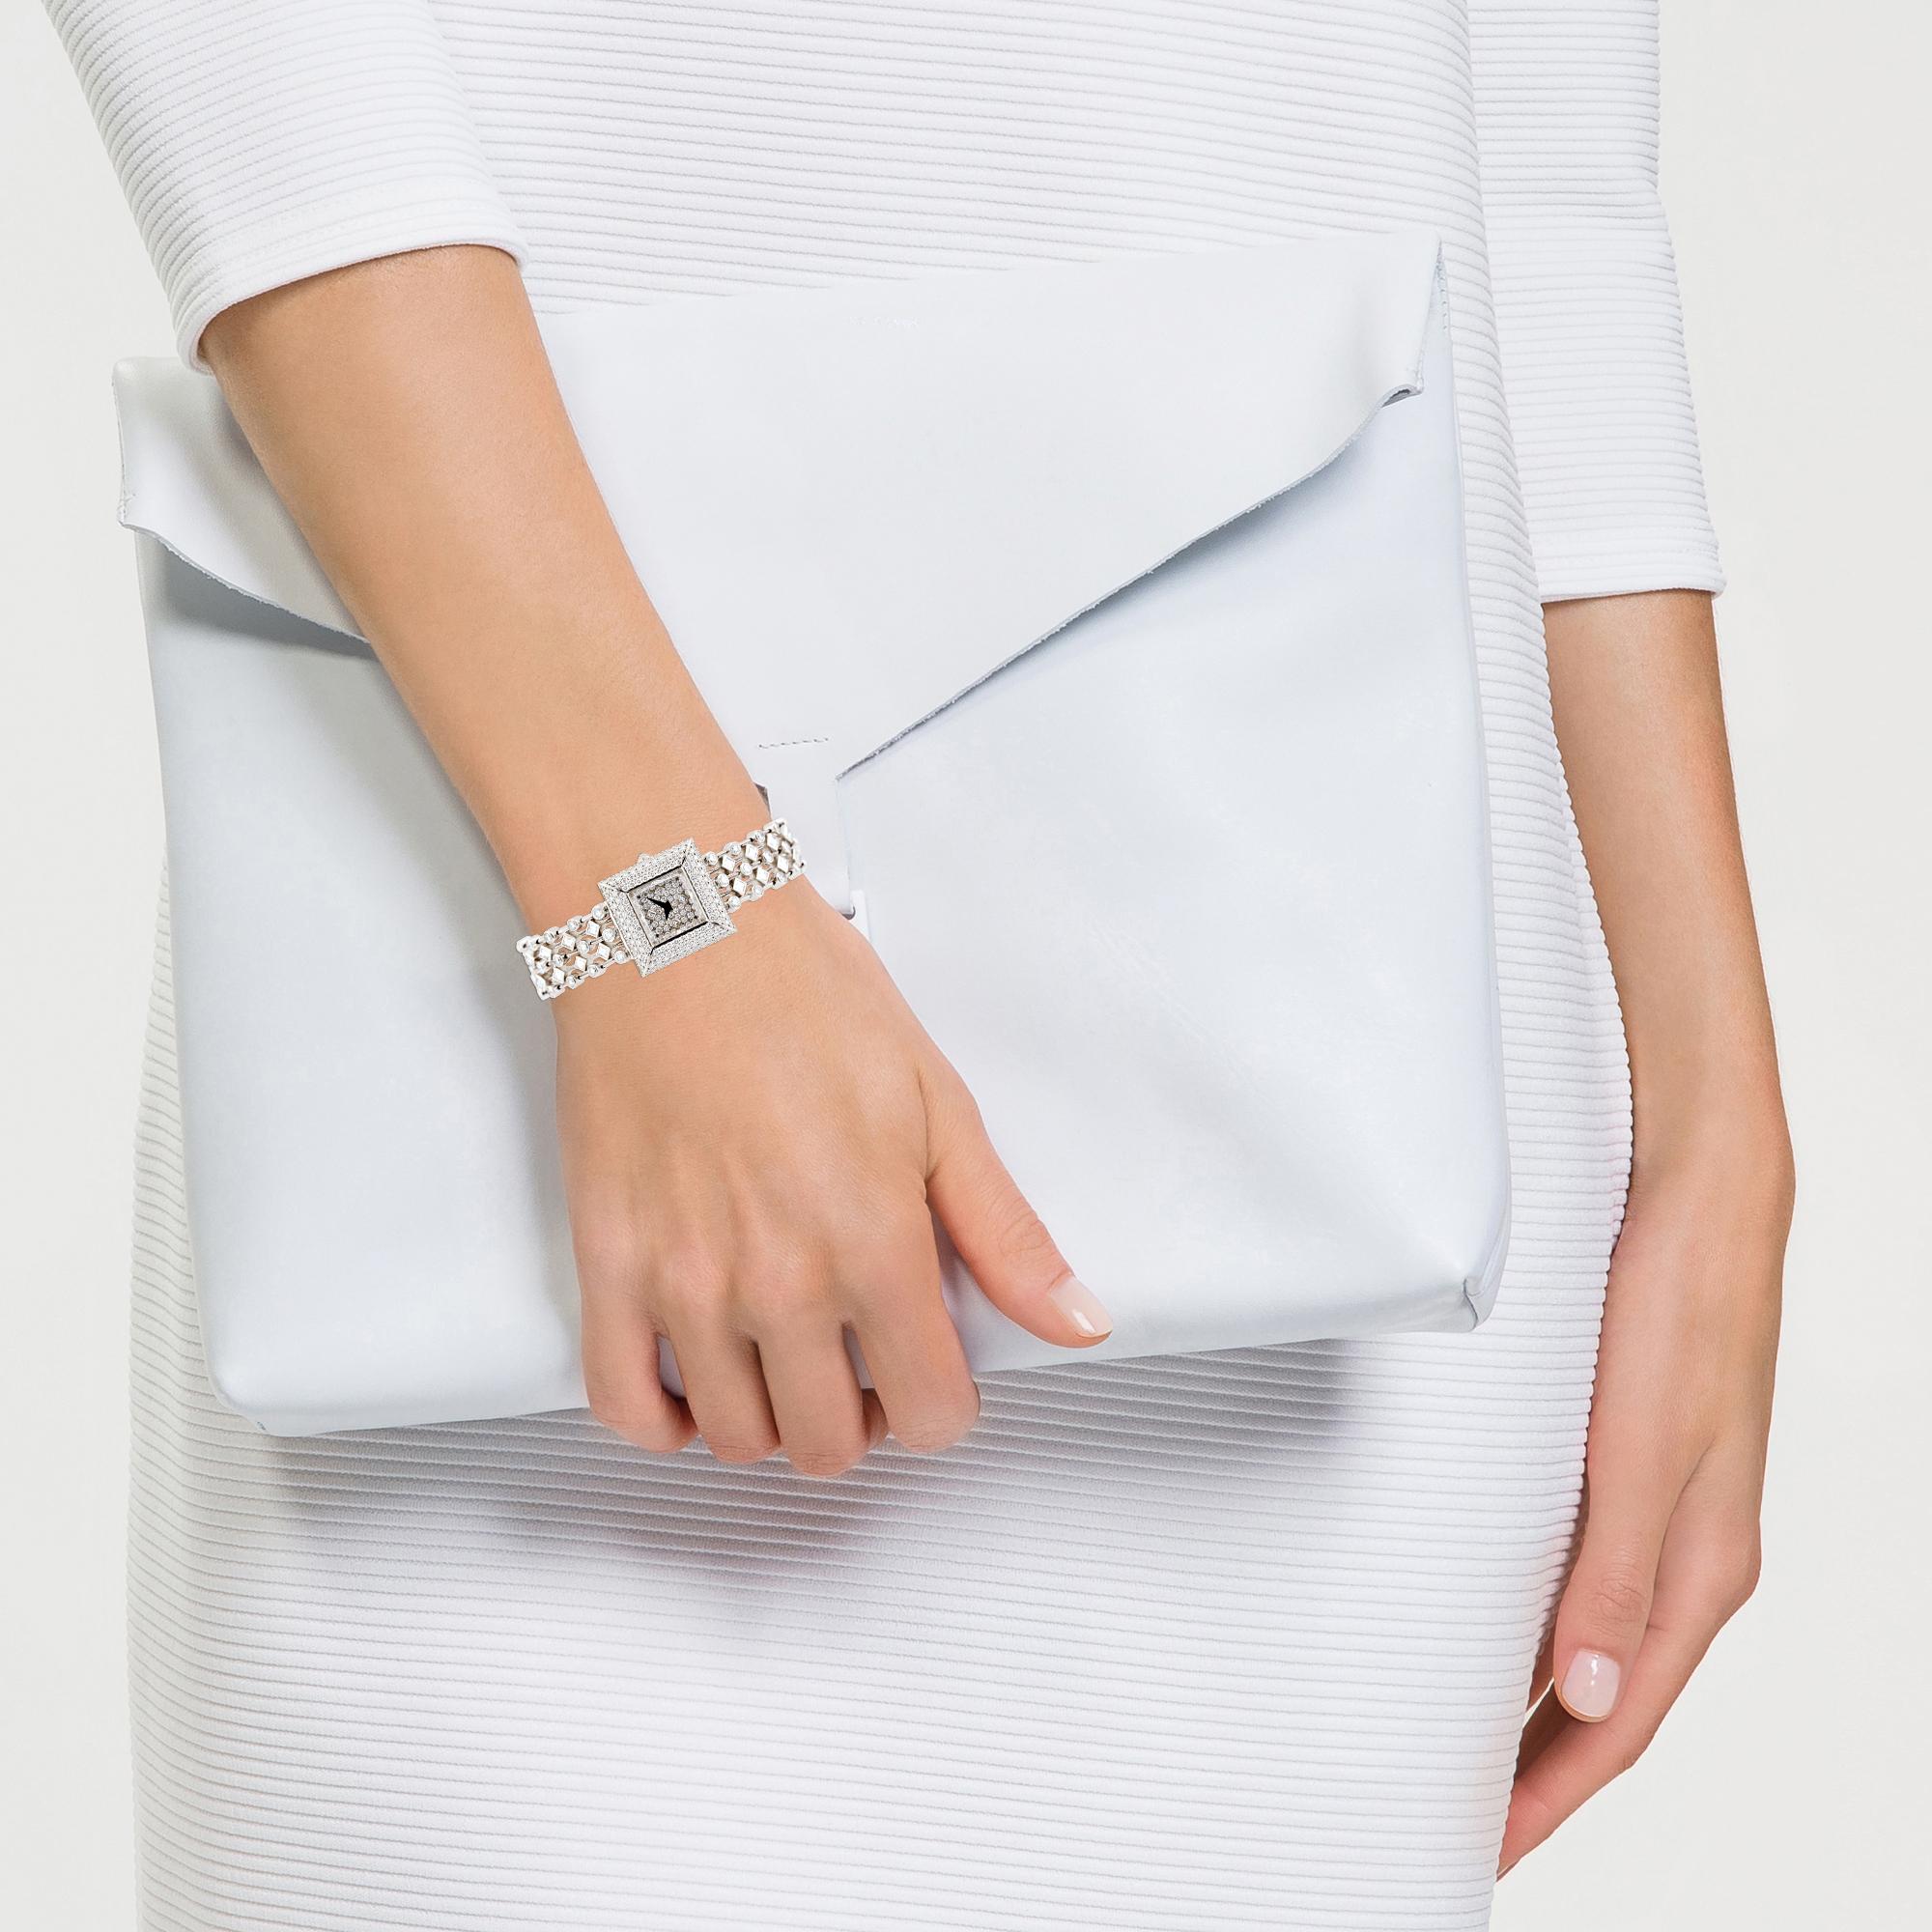 Fans of David Morris’s extraordinary jewellery will find this spectacular white diamond watch creation equally captivating. The watch’s bold, square bezel is set entirely with white diamonds, which extend to the underside of the bezel towards the